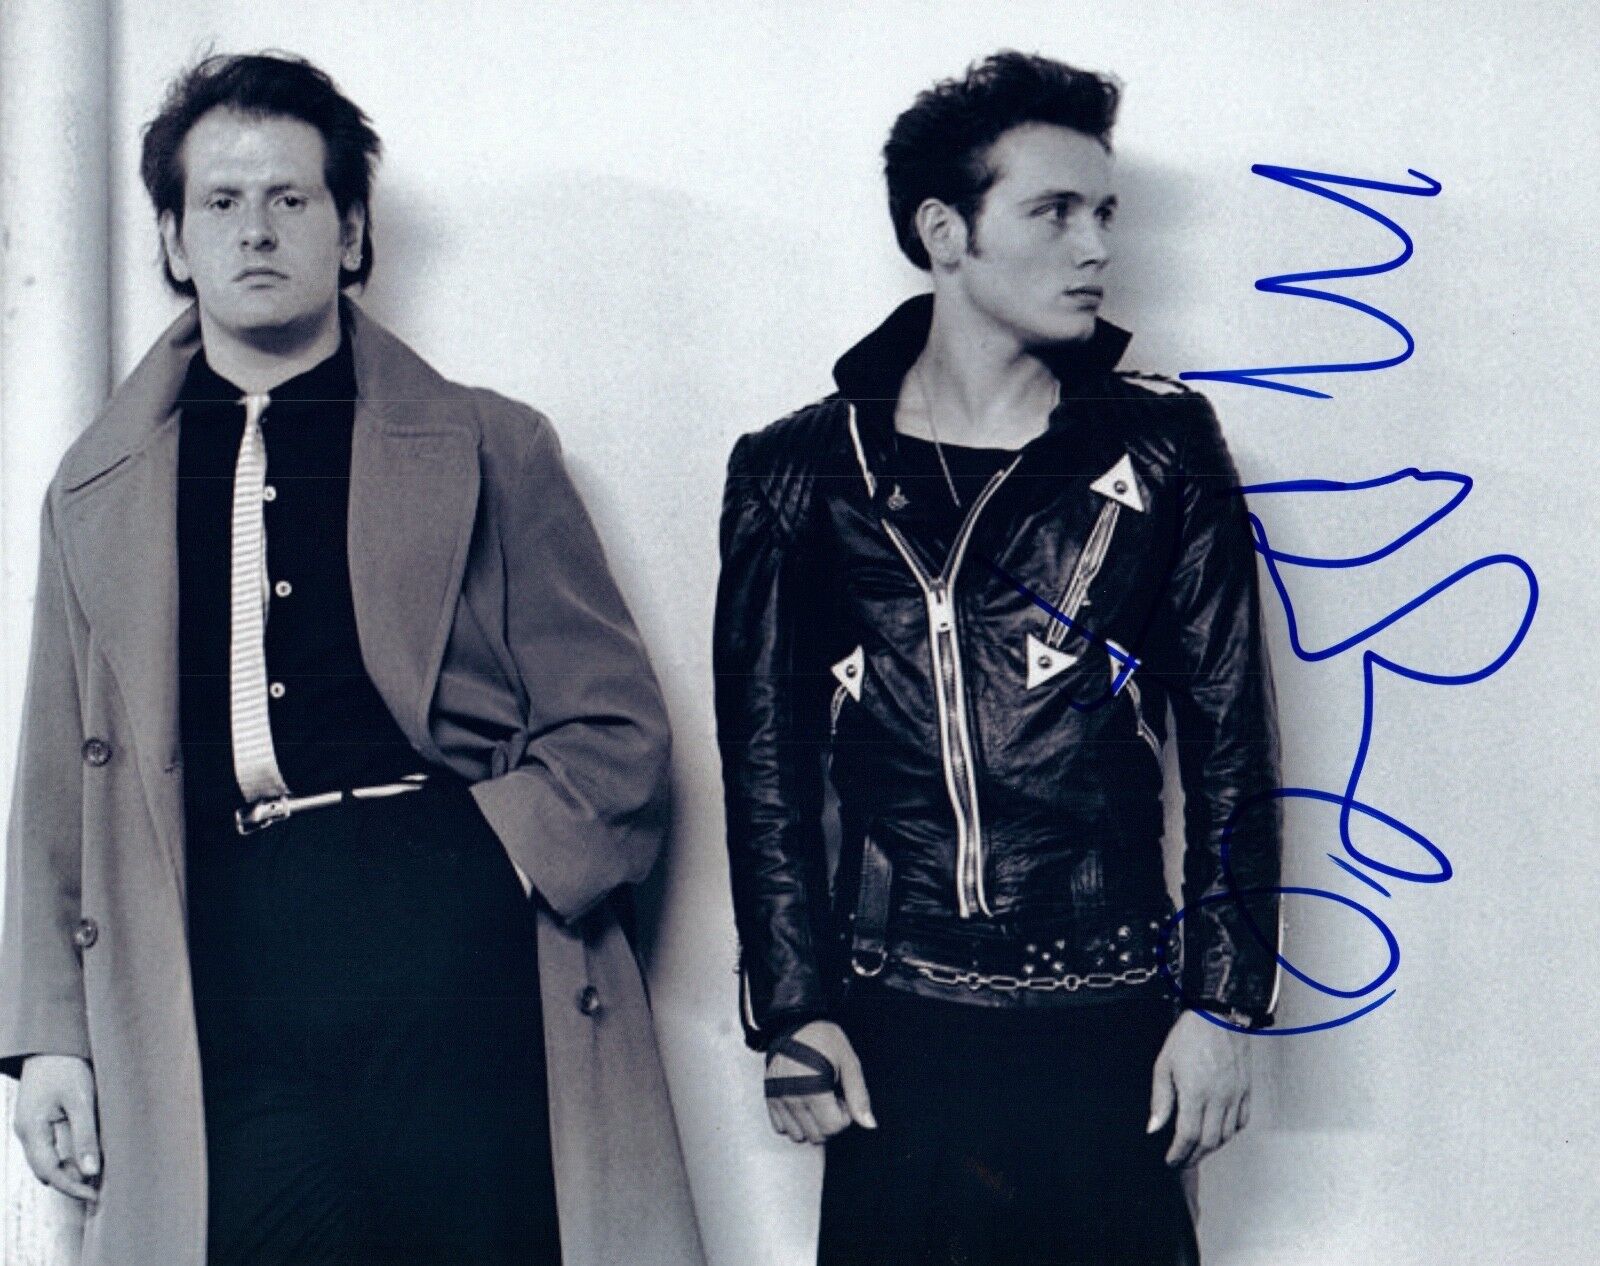 Marco Pirroni Signed Autographed 8x10 Photo Poster painting Adam and the Ants Guitarist COA